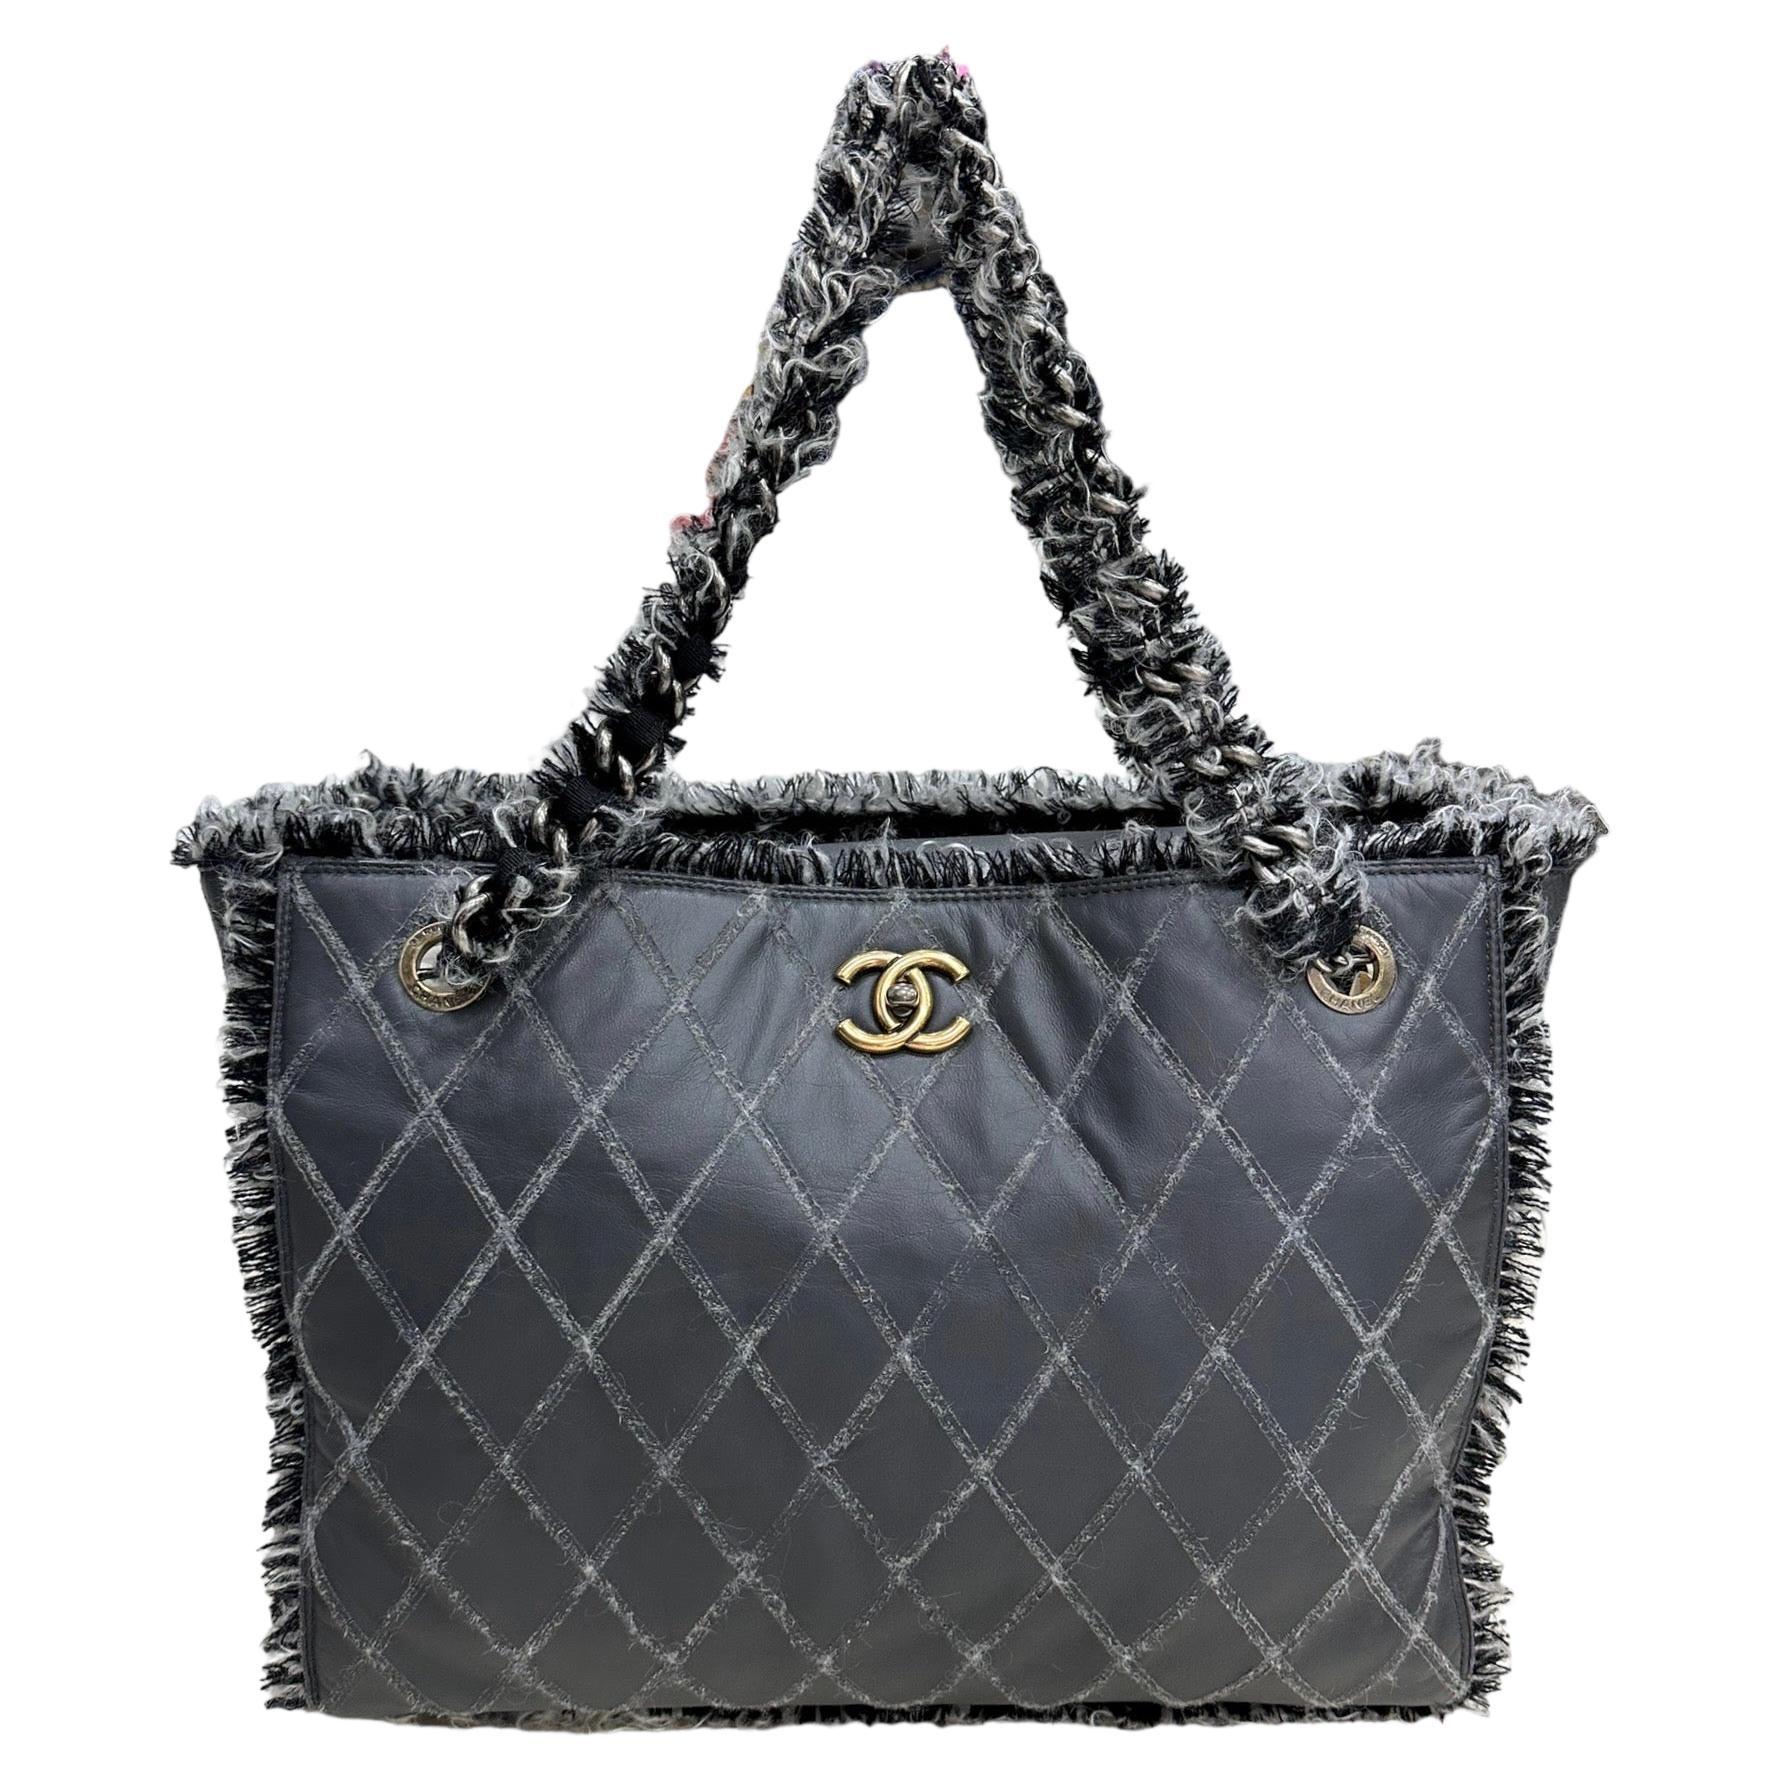 2011 Chanel Tweed Grey Tote Bag For Sale